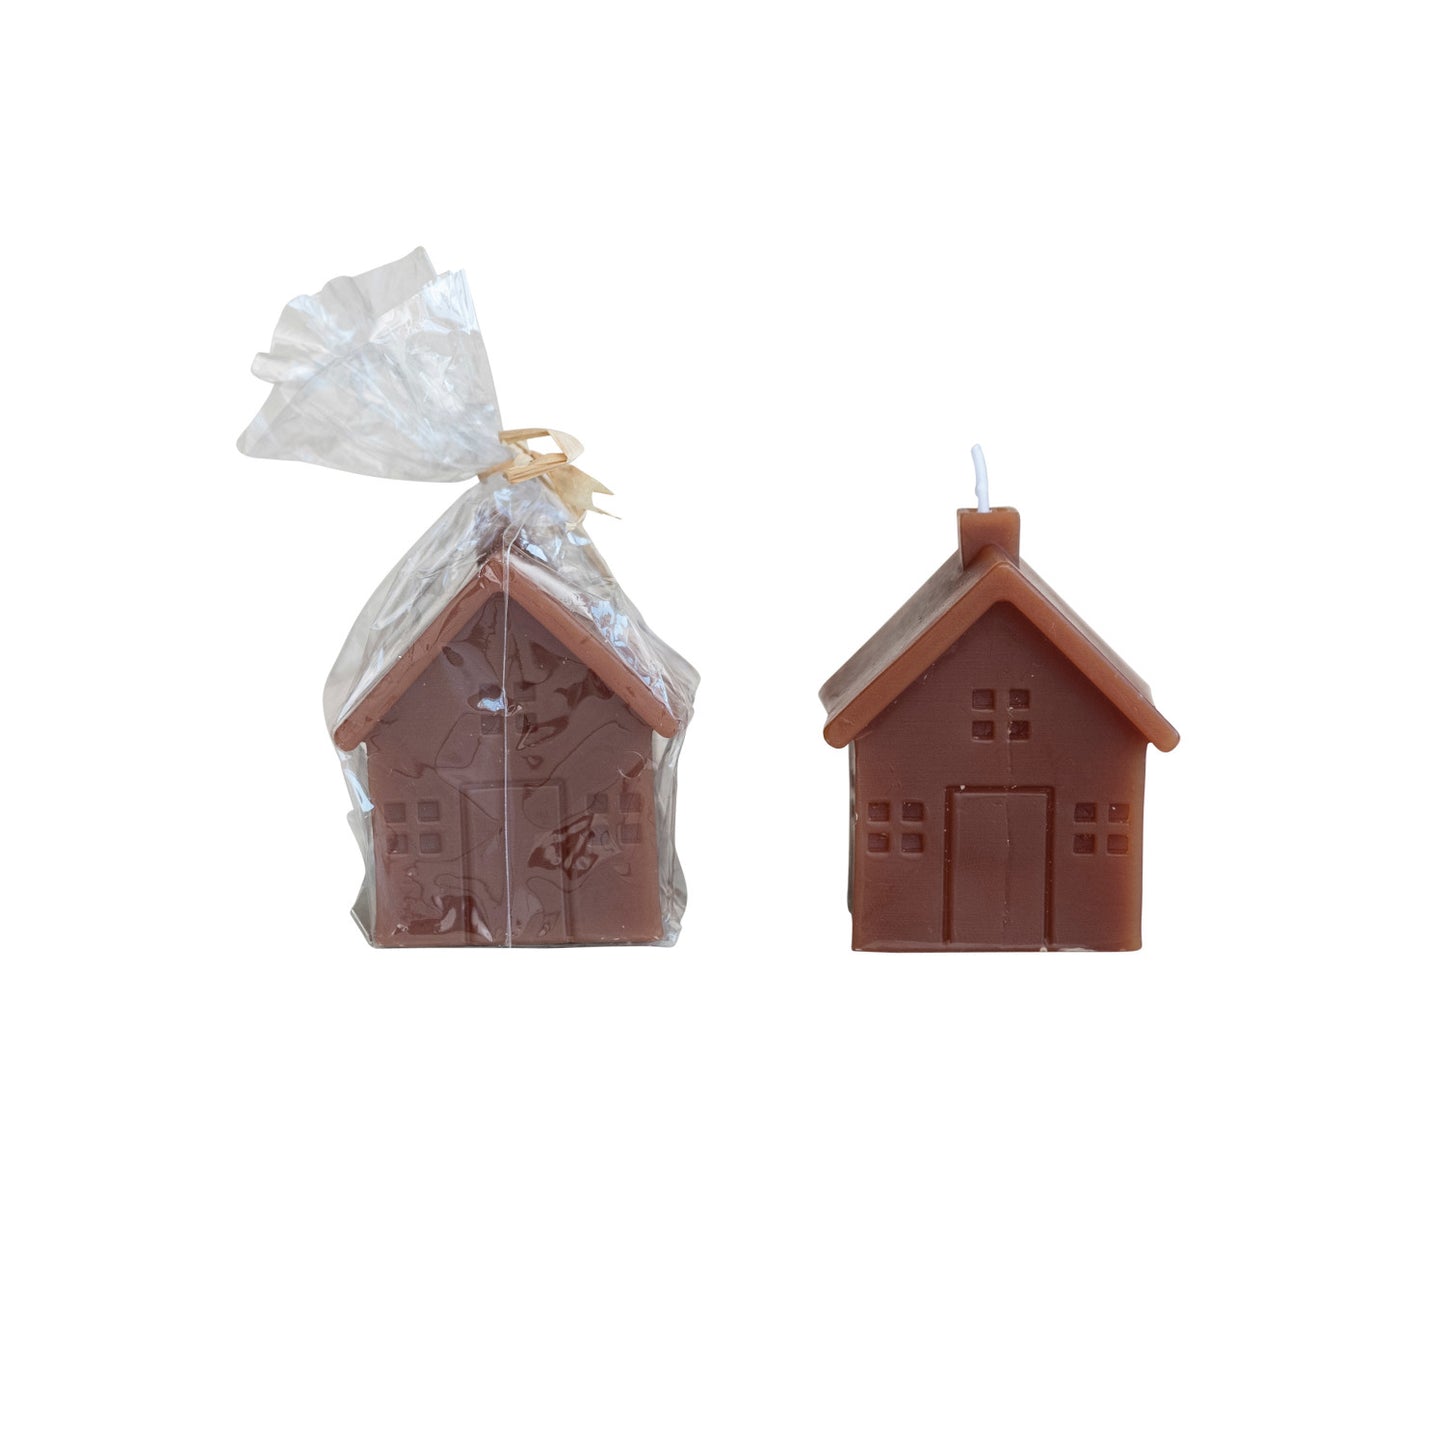 Unscented House Shaped Candle, Brown